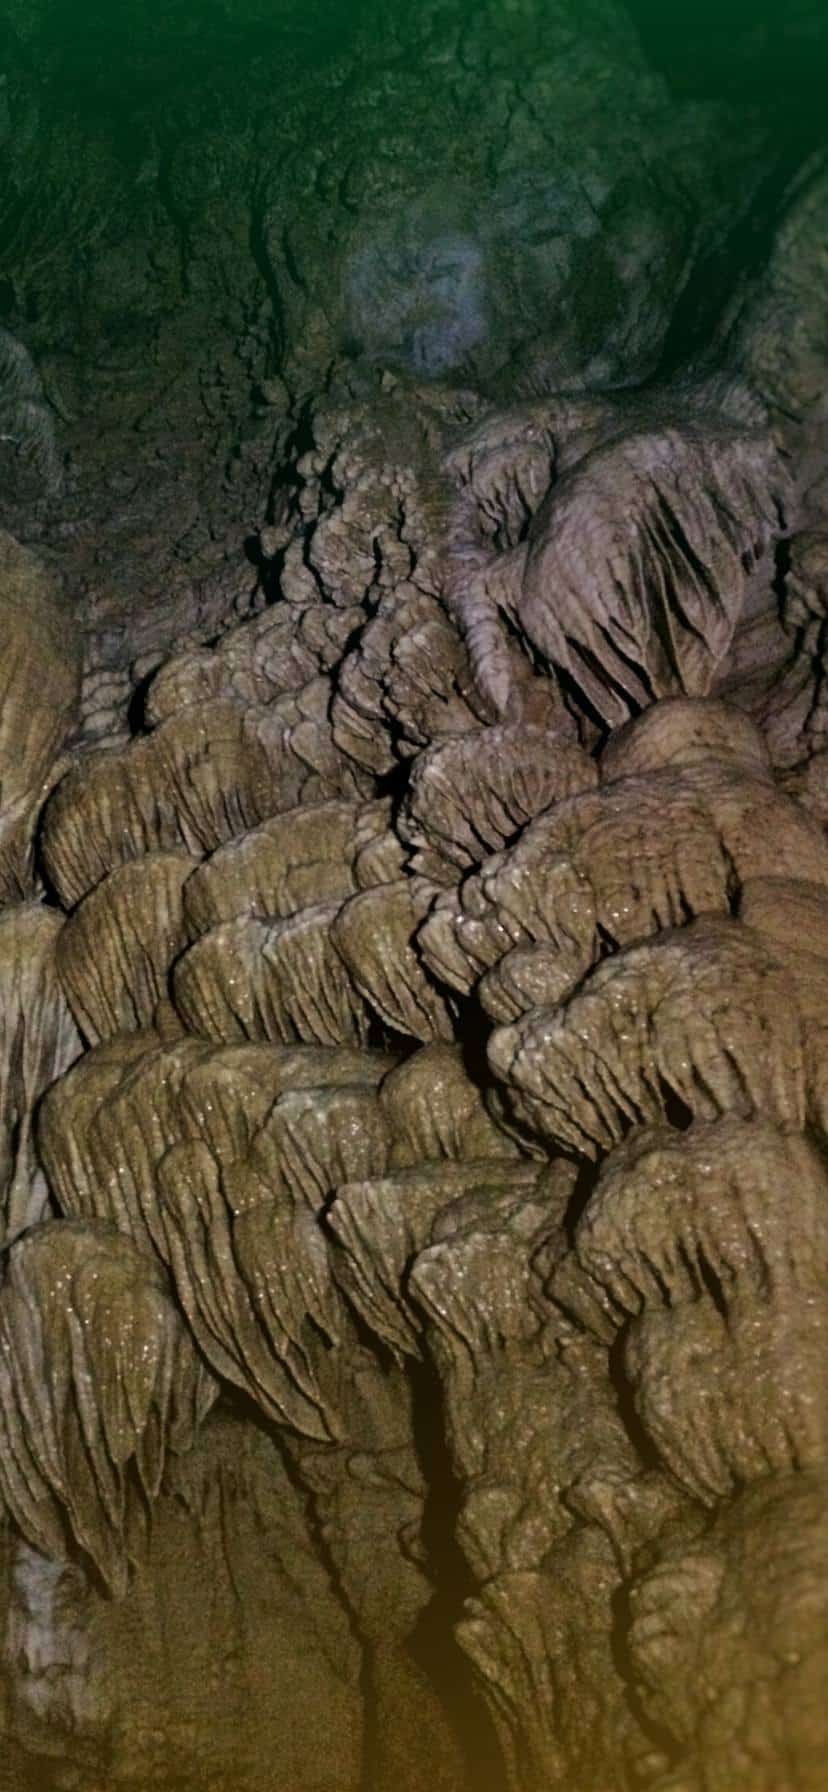 Cave Formations in Oregon Caves National Monument